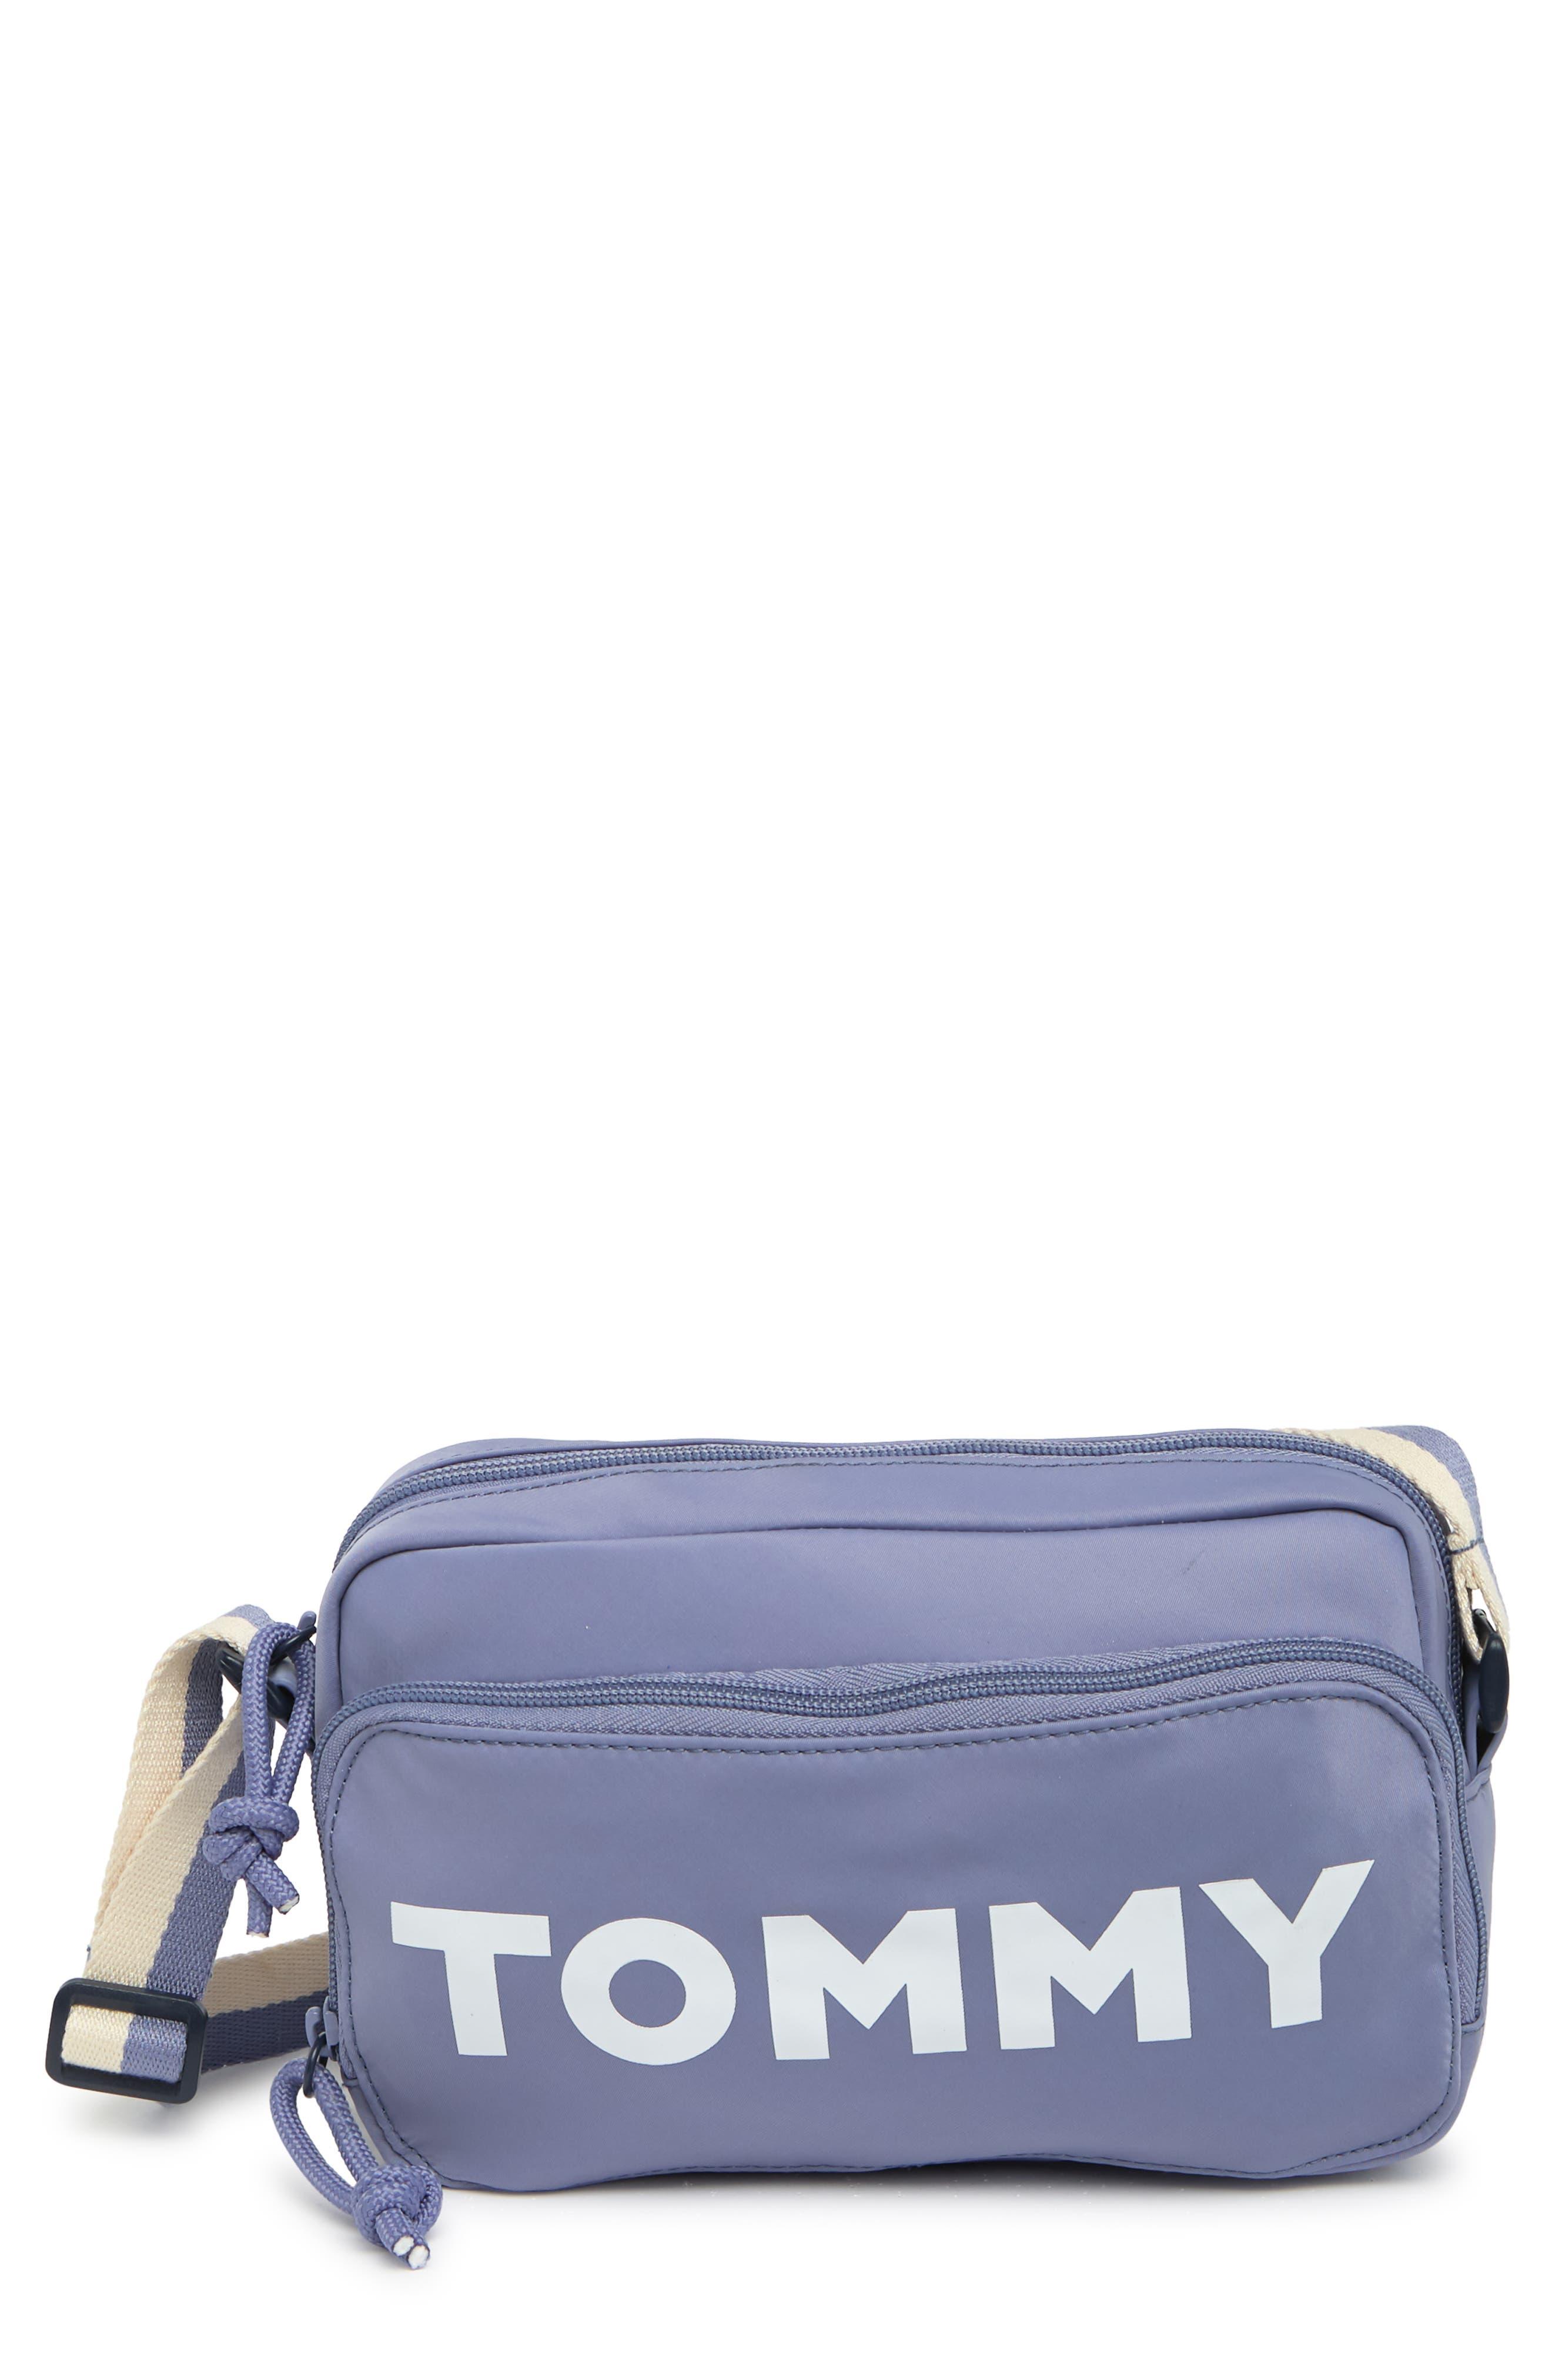 Tommy Hilfiger Cory Ii Nylon Camera Crossbody Bag In Blue Stone At  Nordstrom Rack for Men | Lyst